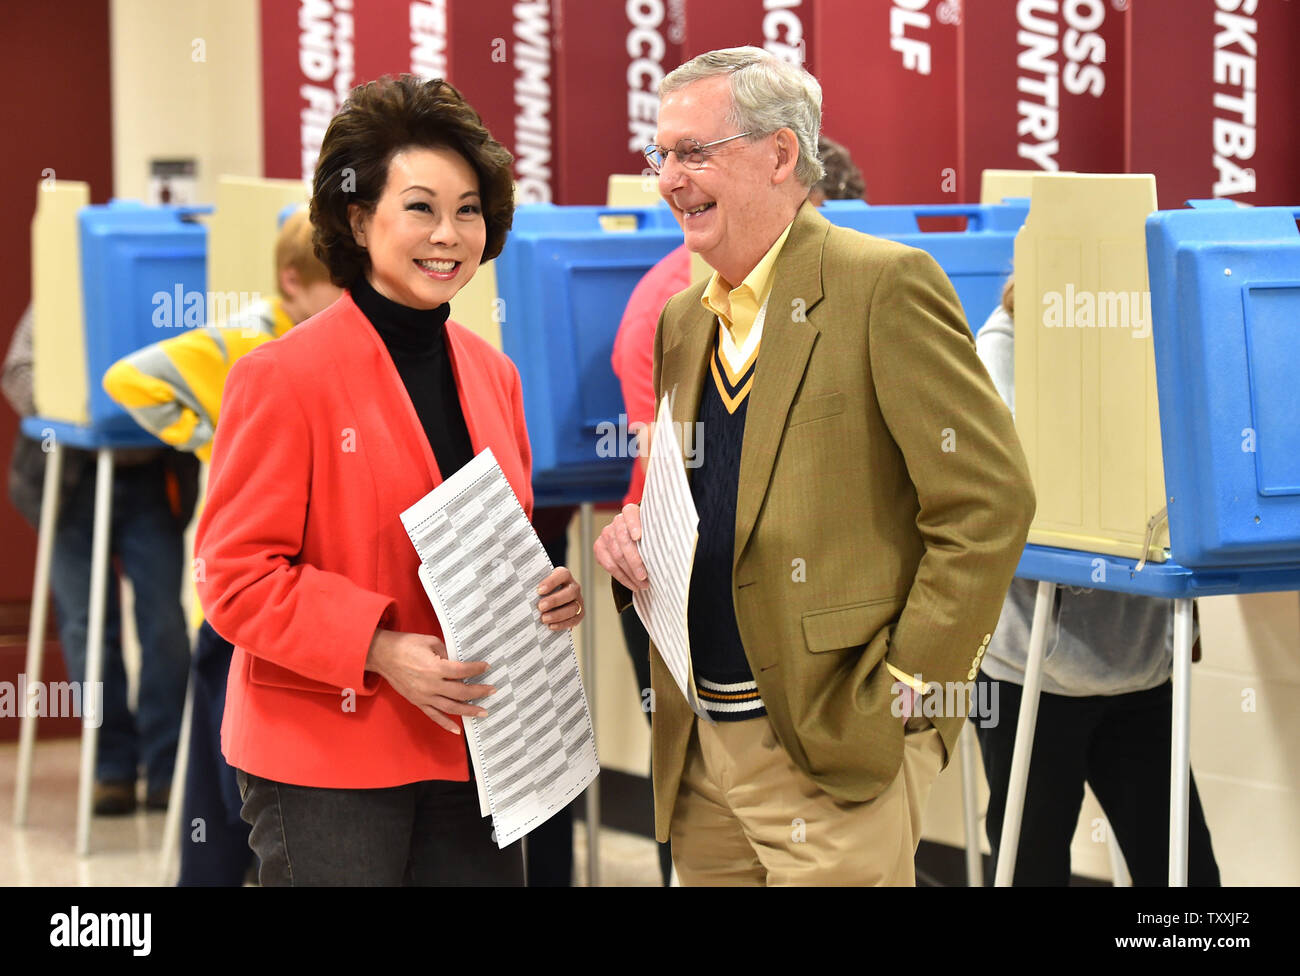 Senate Minority Leader Mitch McConnell, R-Ky, and his wife Elaine Chao prepare to cast his ballot on election day at Bellarmine University in Louisville, Kentucky on November 4, 2014.  UPI/Kevin Dietsch Stock Photo